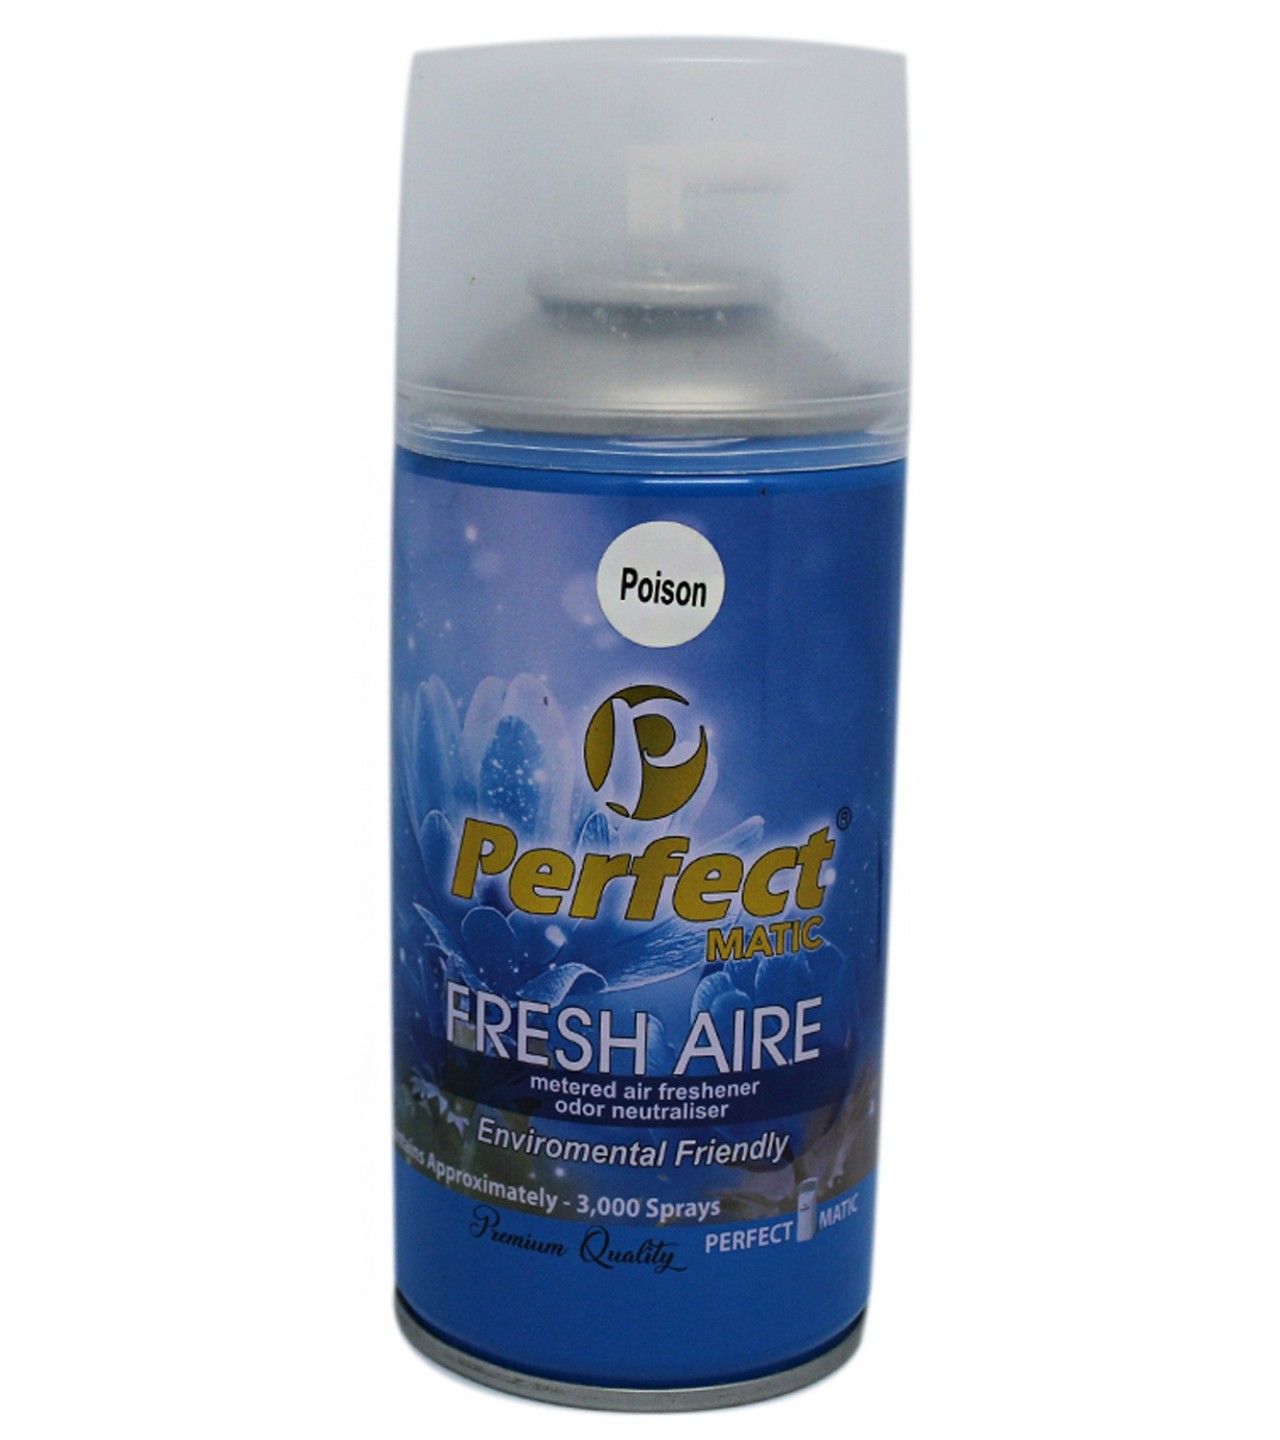 Automatic Air Freshener Dispenser with Free Perfect Matic Fresh Air - 300 ml (Bottle)